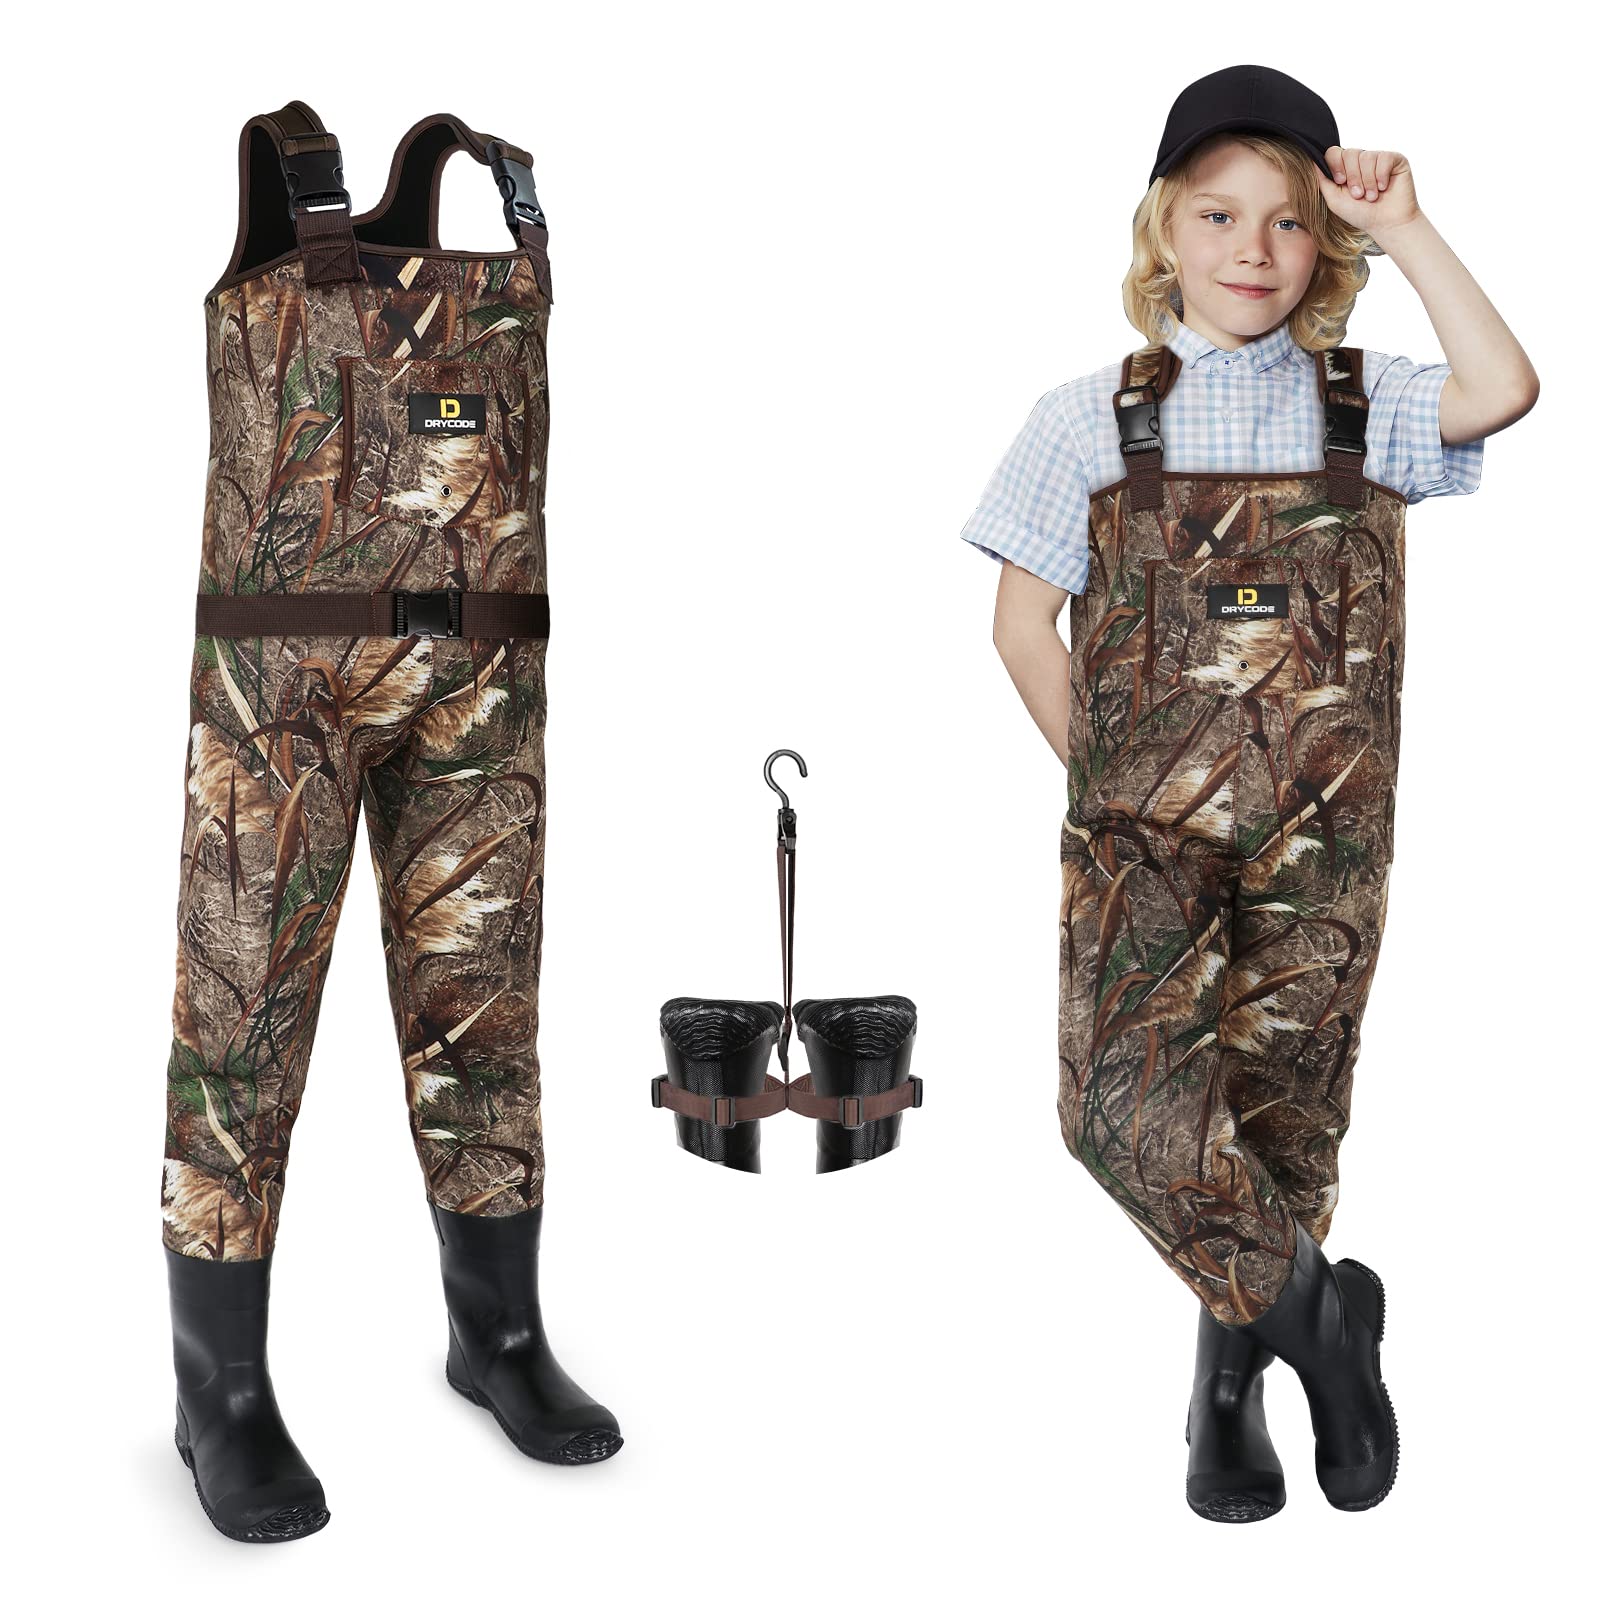 DRYCODE Kids Waders with Insulated Boots, Youth Waders for Toddler &  Children, Waterproof Warm 4mm Neoprene